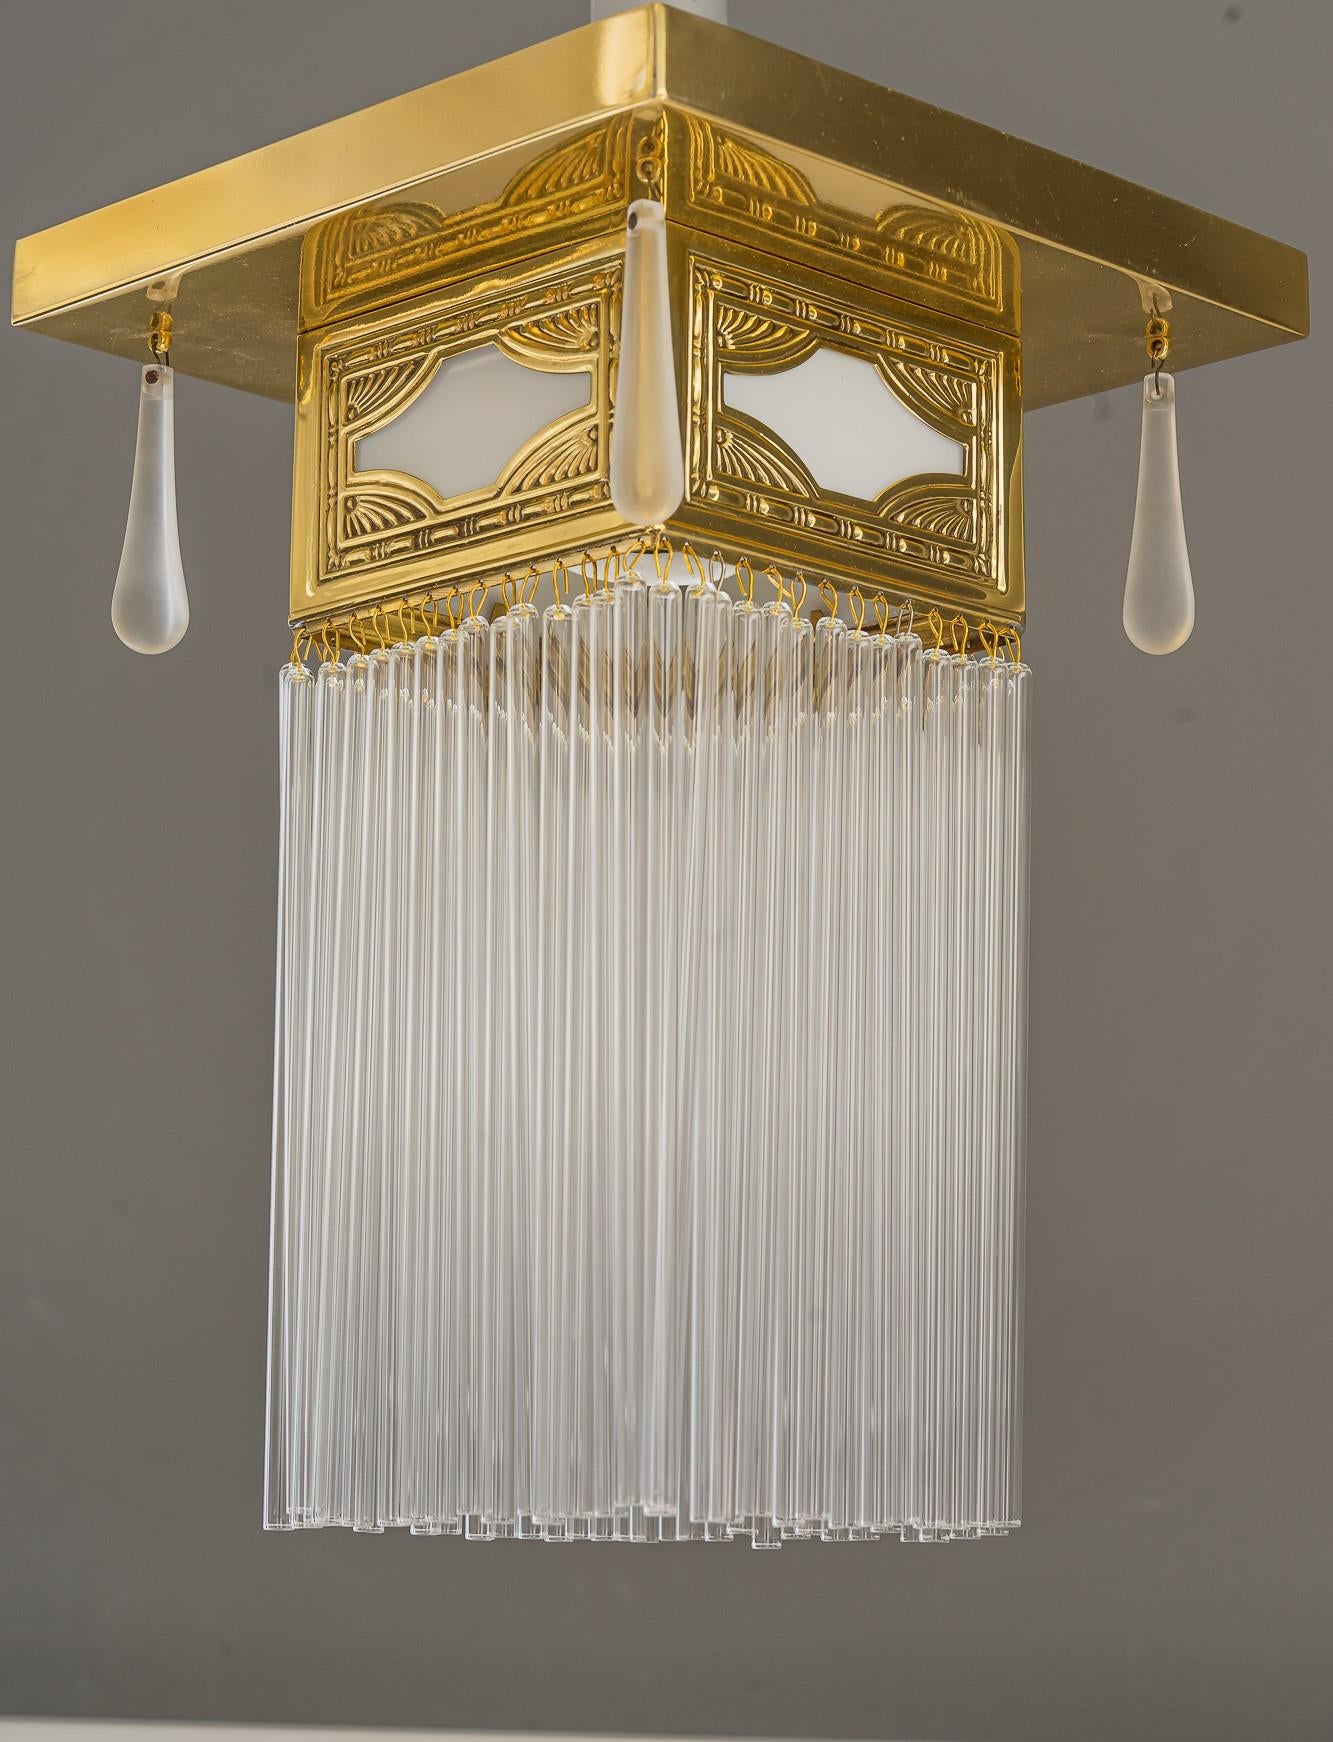 Small Art Deco ceiling lamp with glass sticks around 1920s
Polished and stove enamelled
Glass sticks are replaced ( new ).